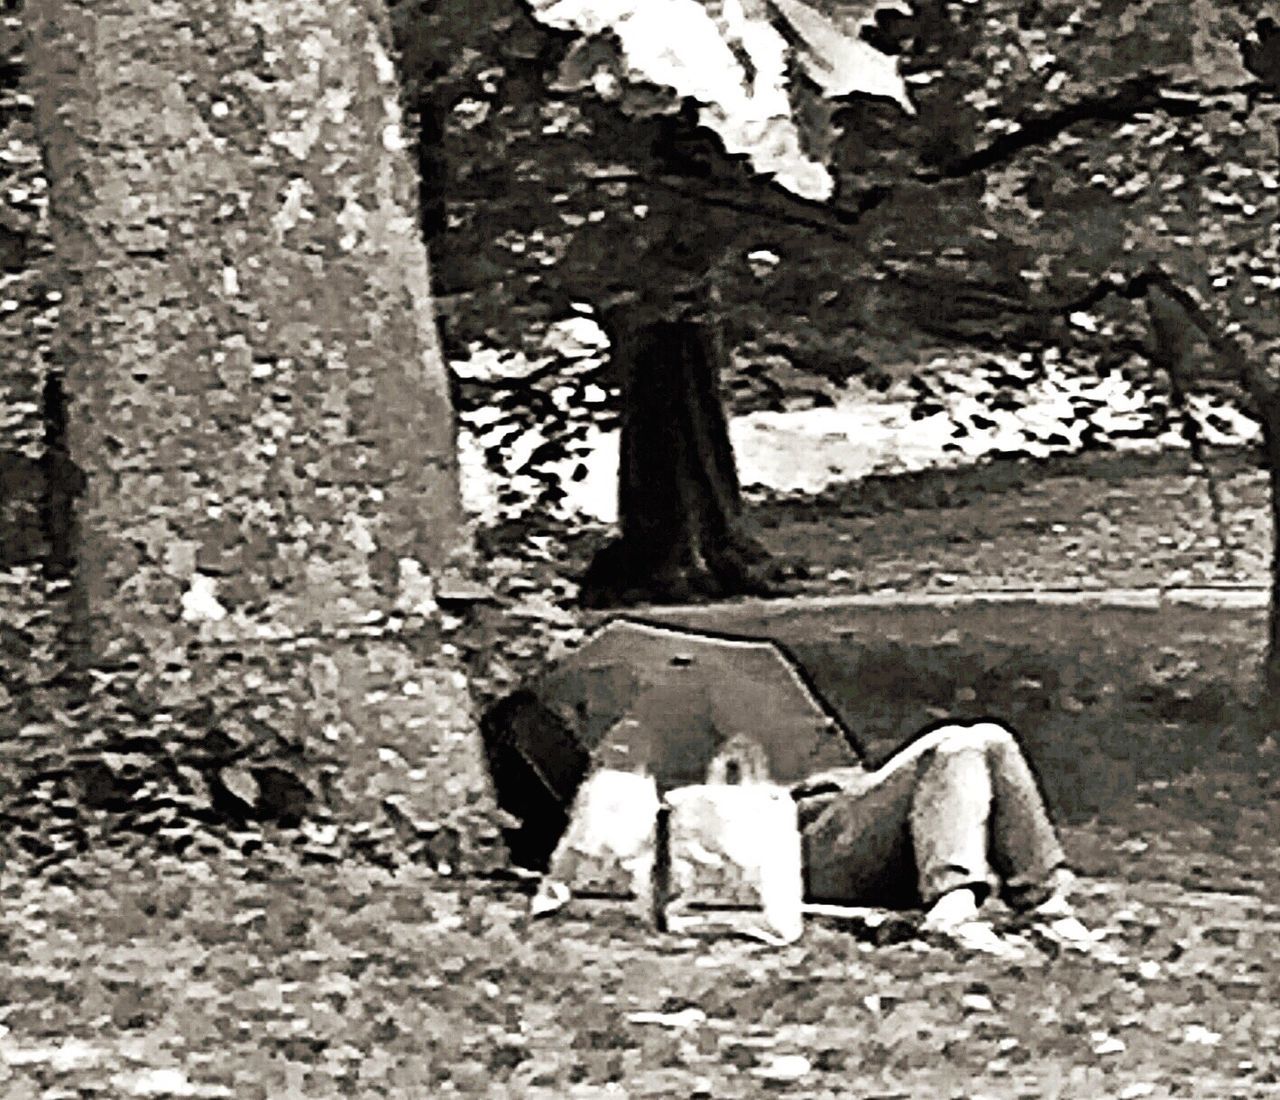 REAR VIEW OF YOUNG MAN SITTING ON TREE STUMP